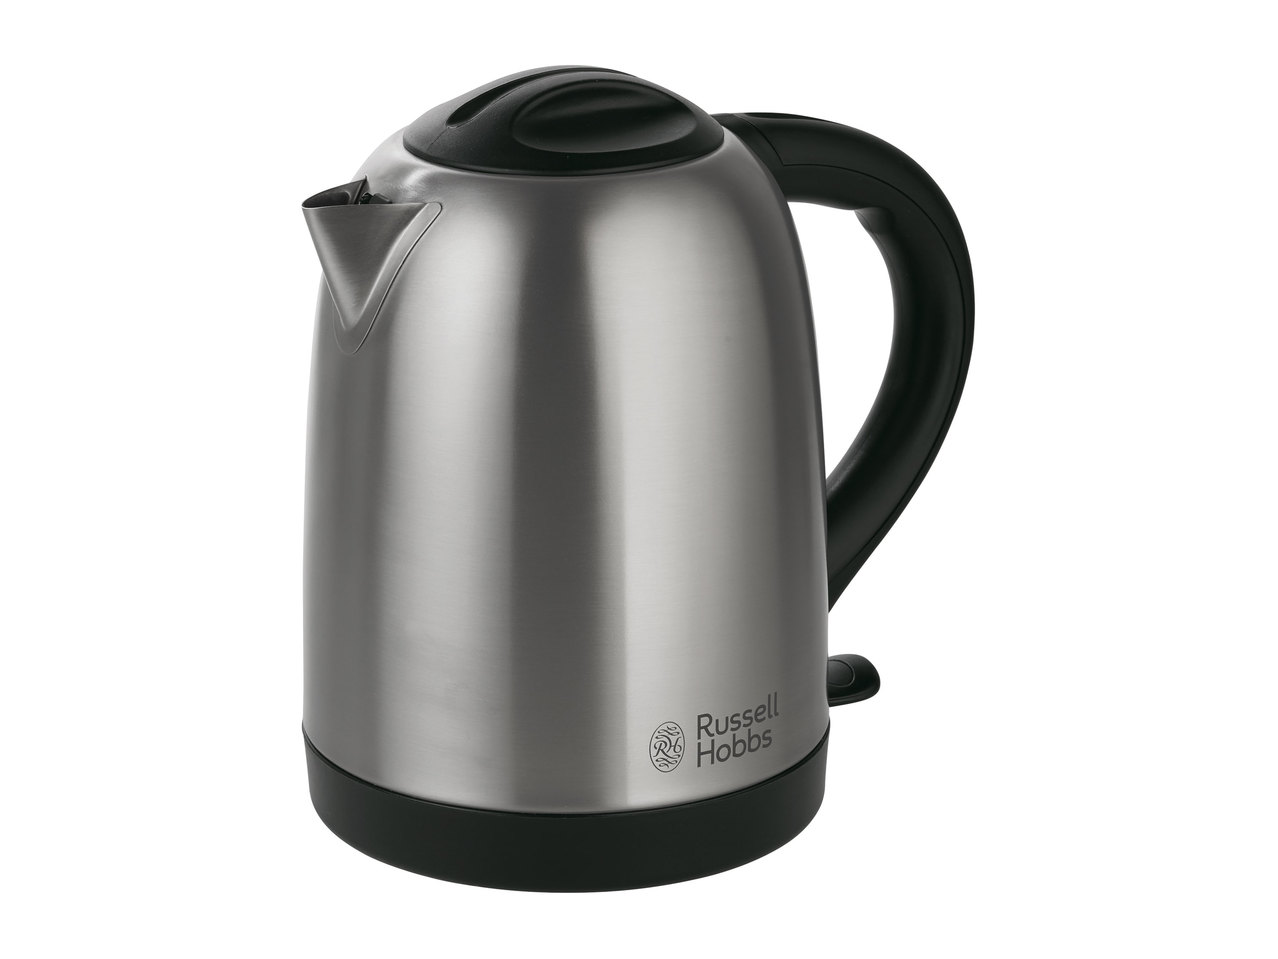 Russell Hobbs Oxford Kettle1